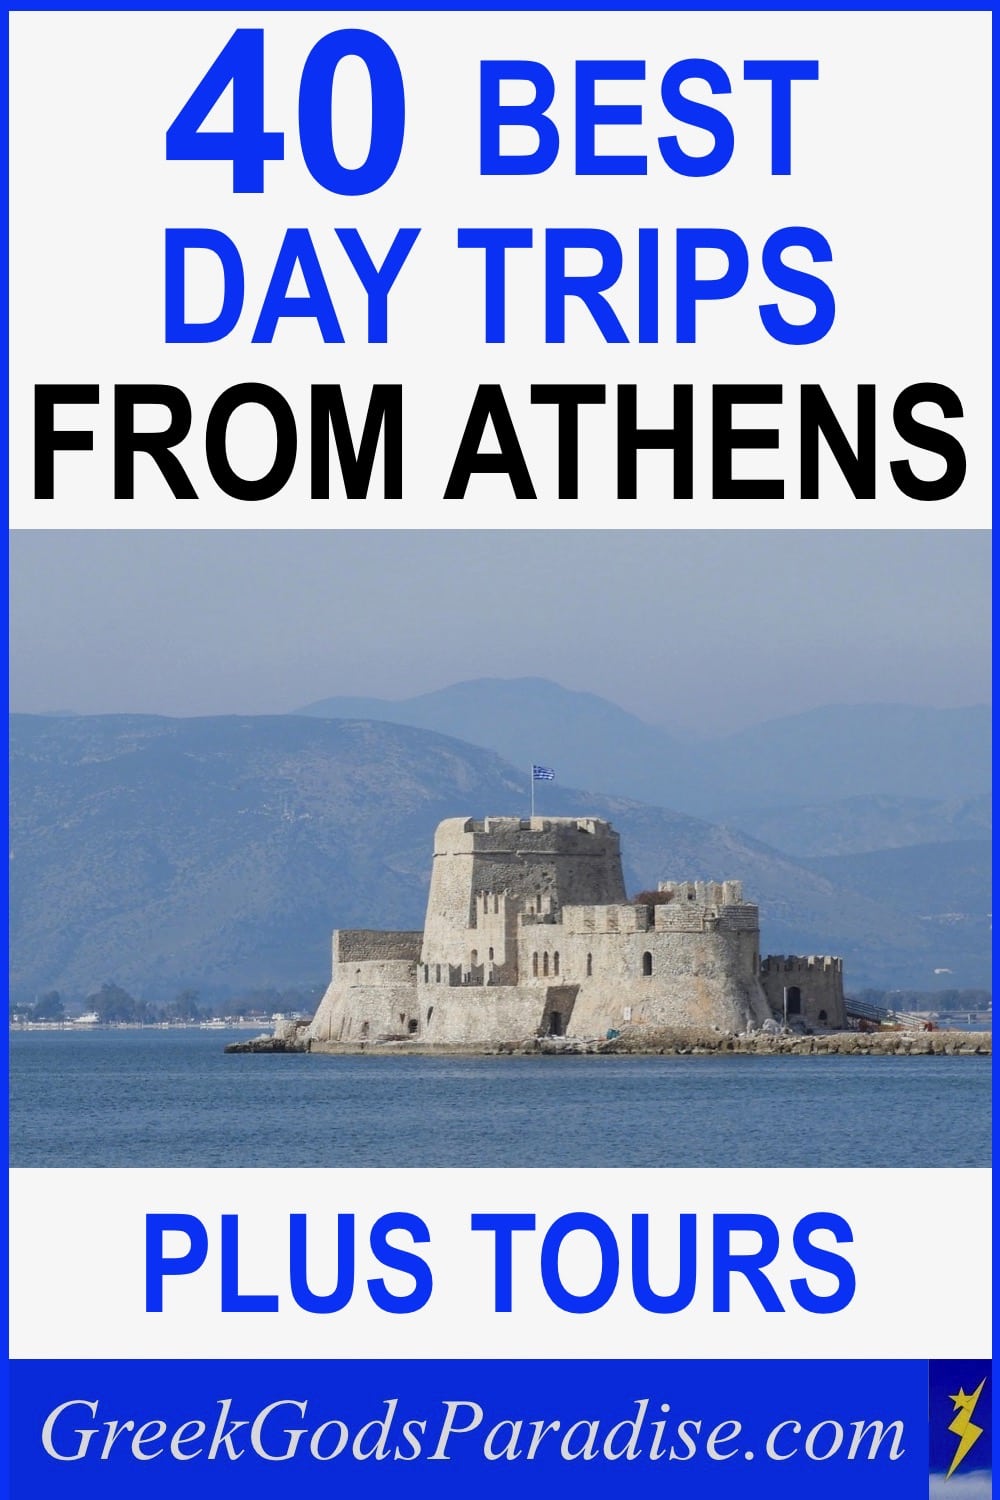 40 Best Day Trips from Athens plus Tours